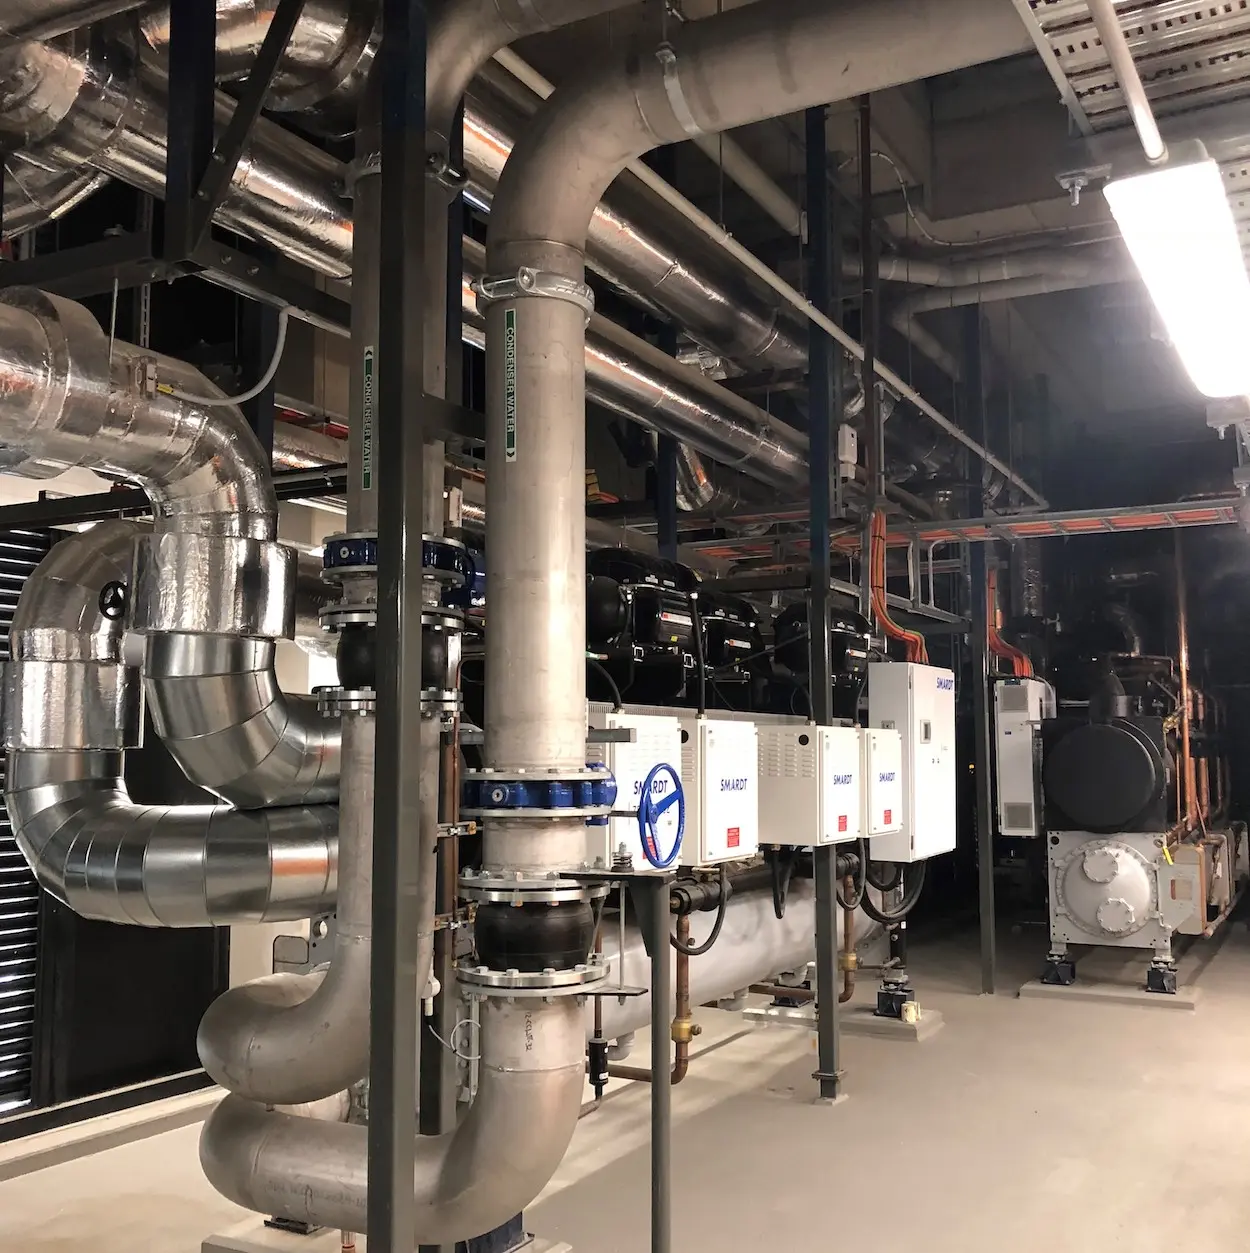 Inside the HIB building with a HVAC piping system installed by Industrial Medical Piping Systems.